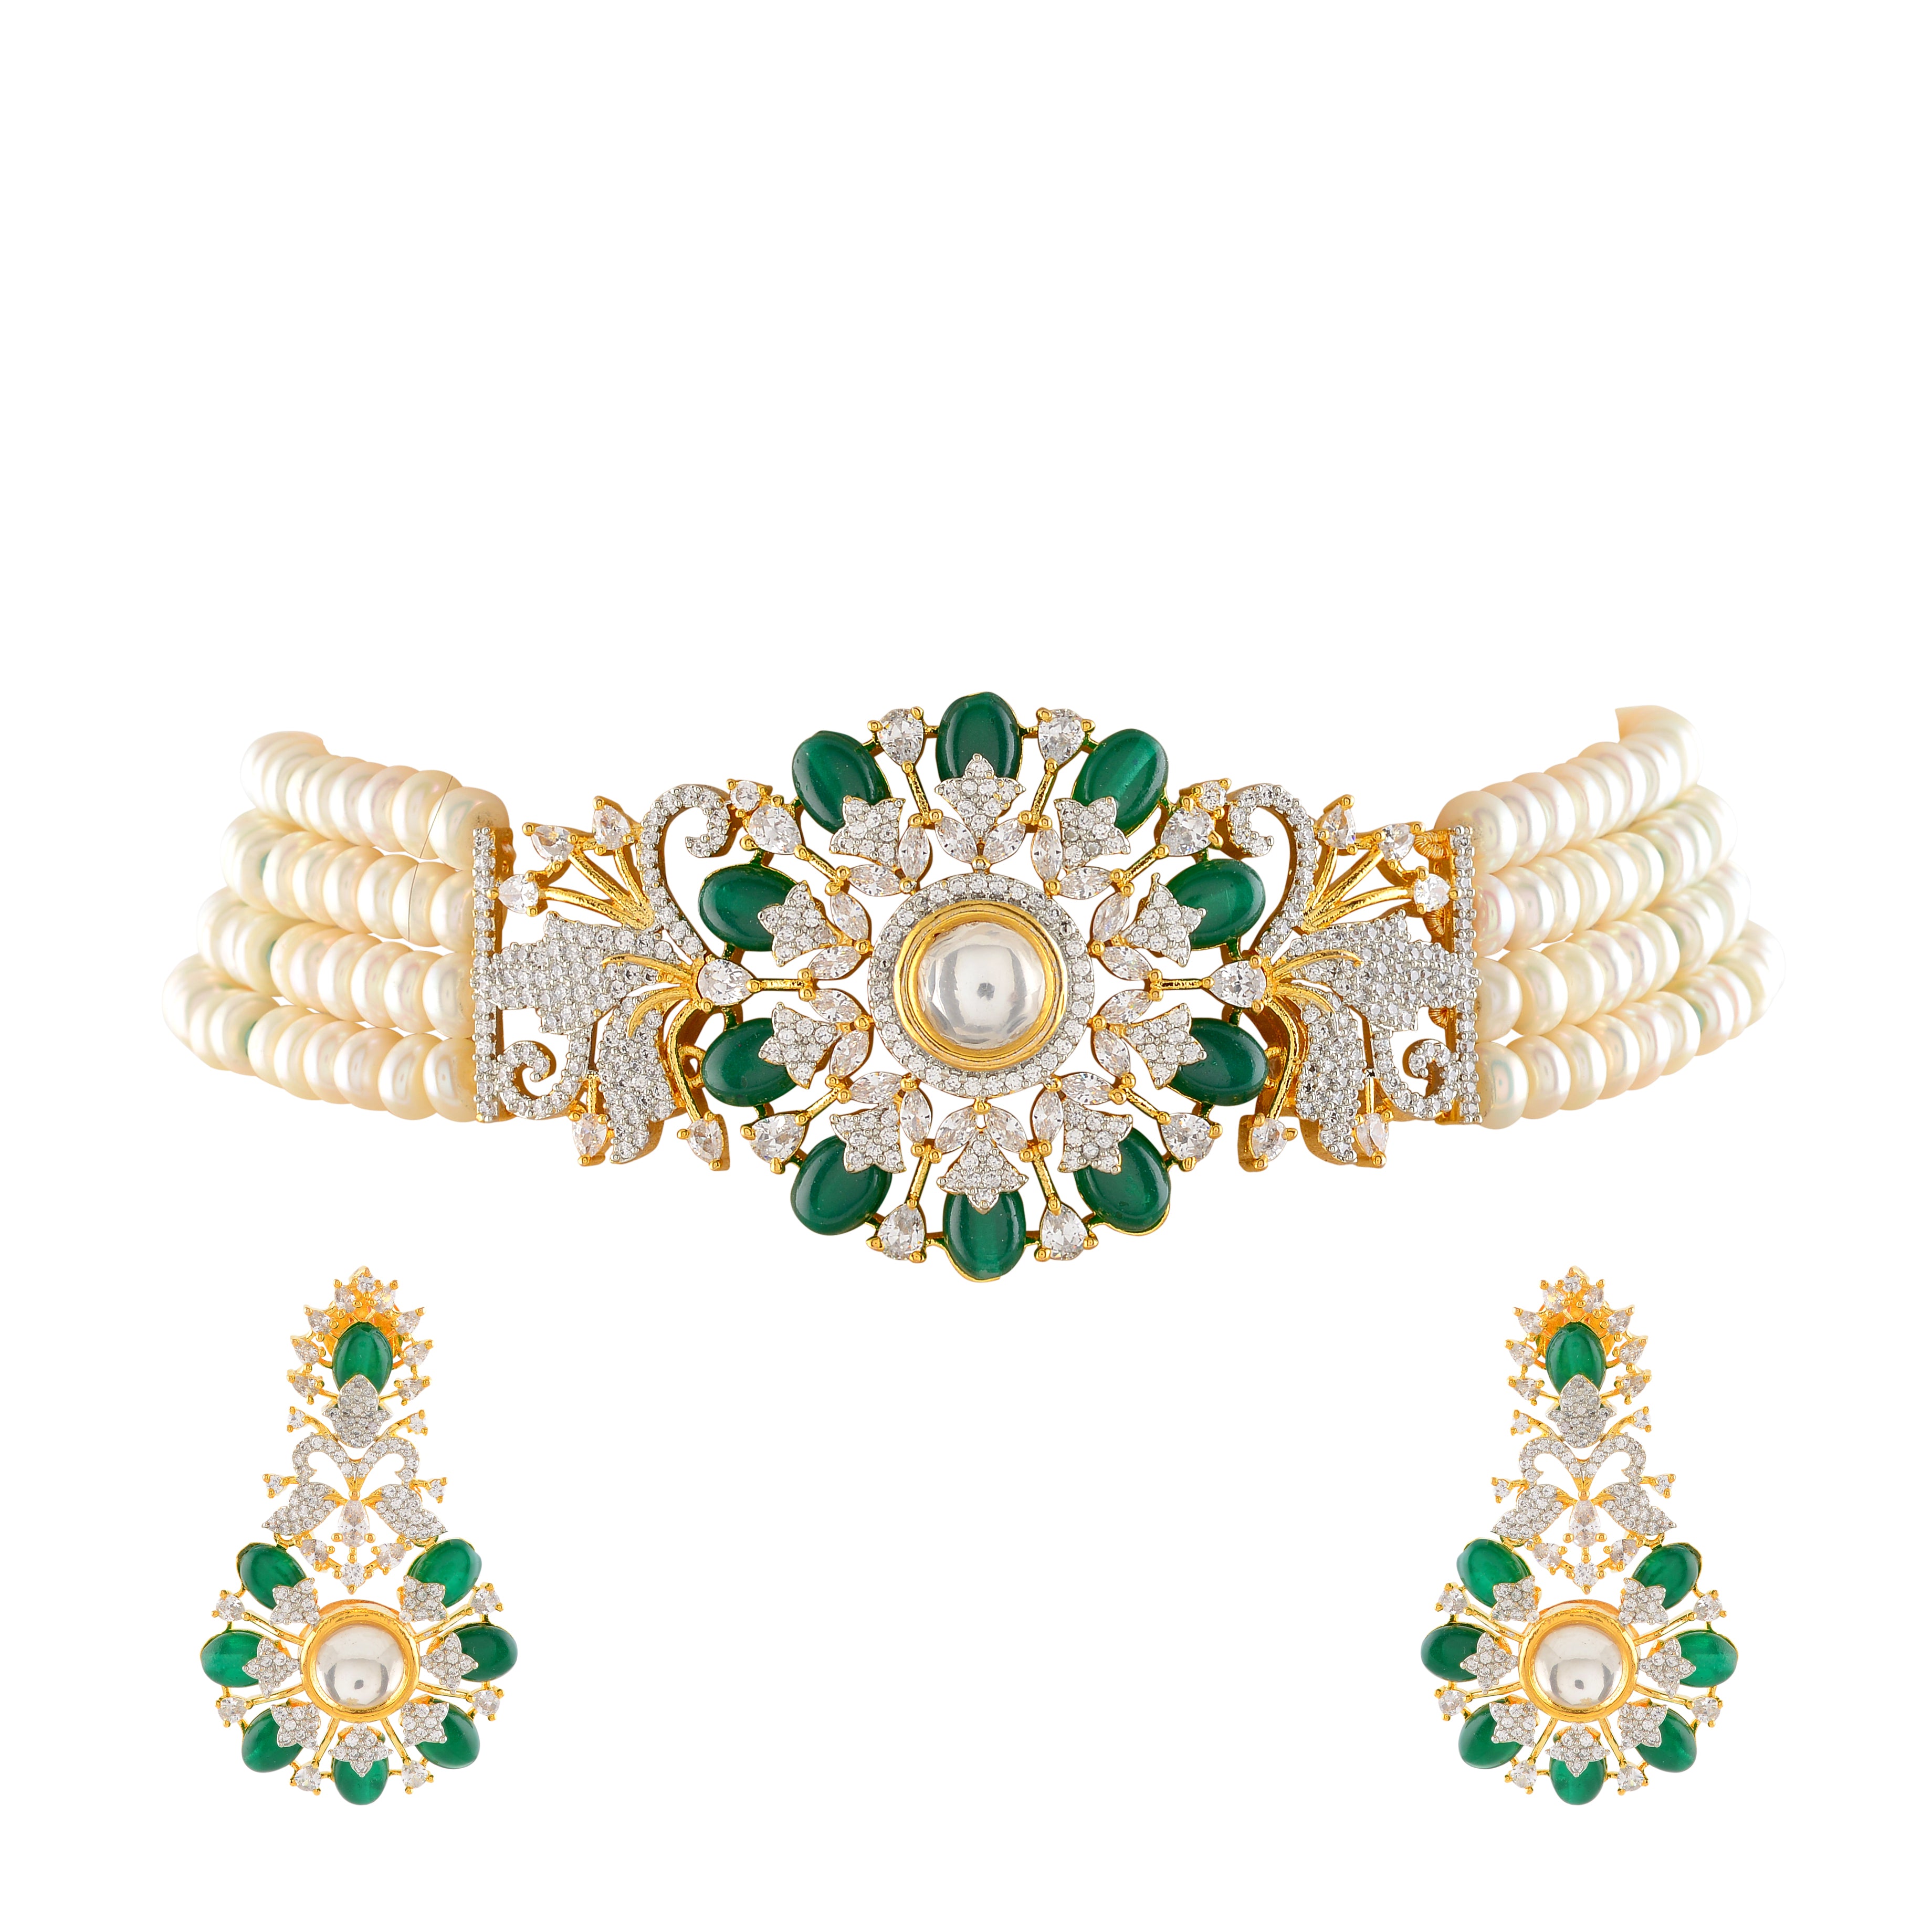 4 Layered Pearl Choker and Earrings with Emerald Stones and CZ's - Krishna Jewellers Pearls and Gems